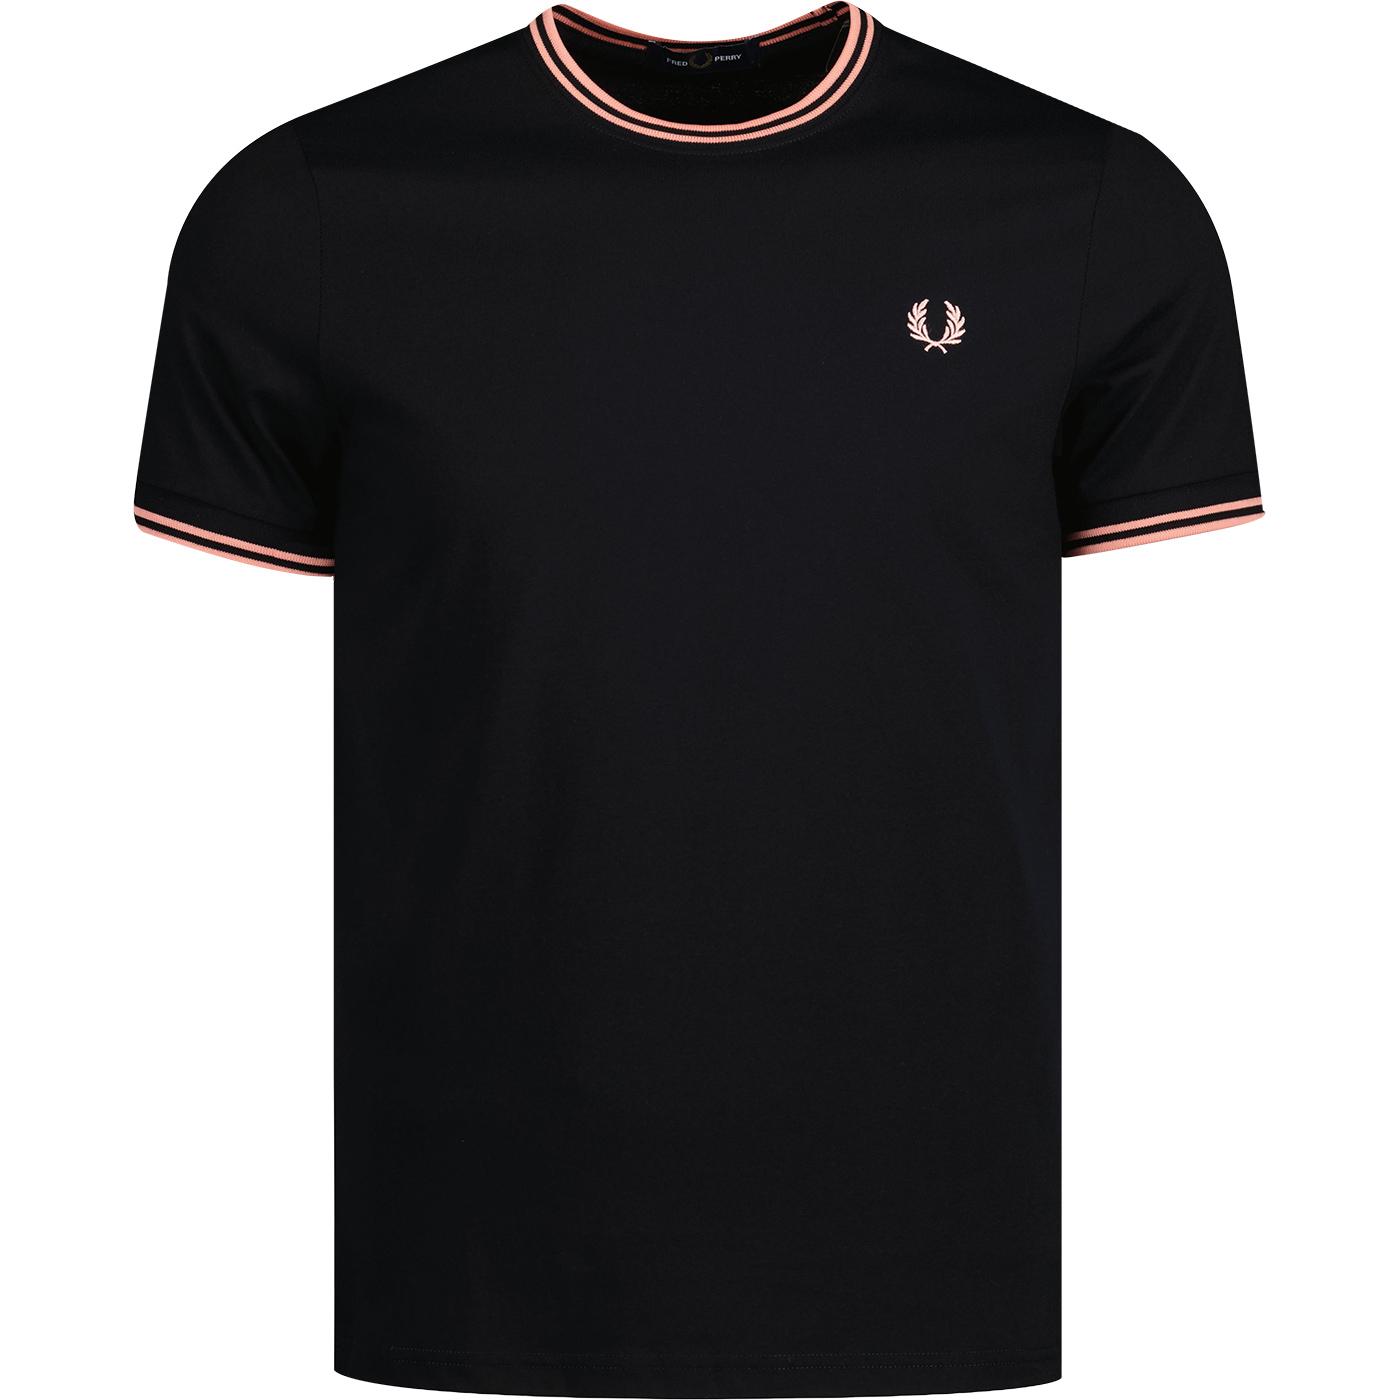 FRED PERRY M1588 Retro Twin Tipped Tee -Black/Pink